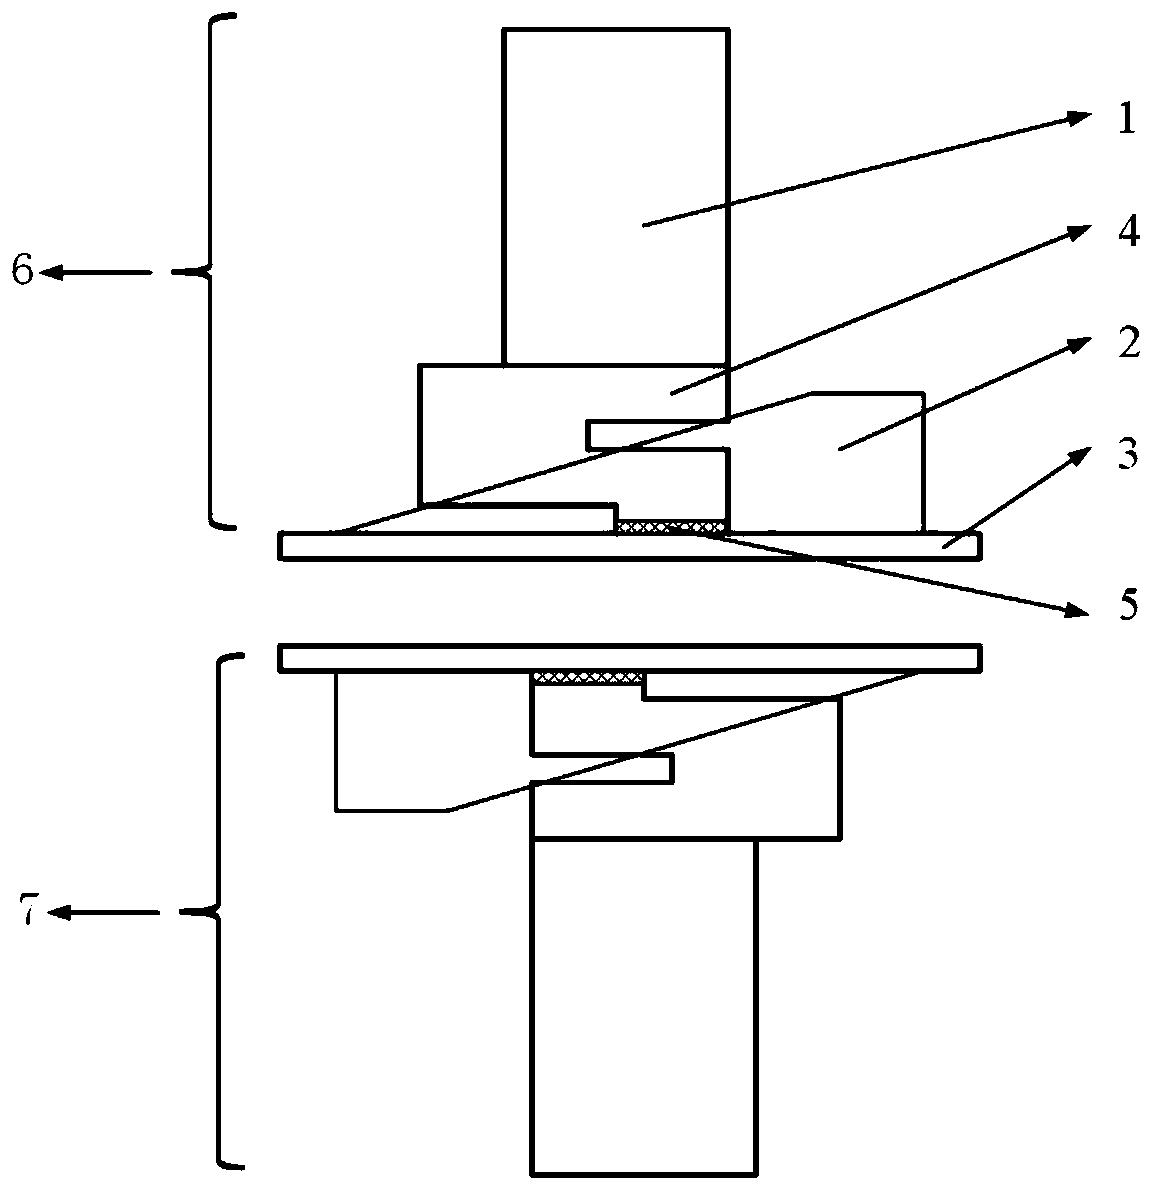 A Bipolar Composite Longitudinal Magnetic Field Contact Structure for Vacuum Interrupter